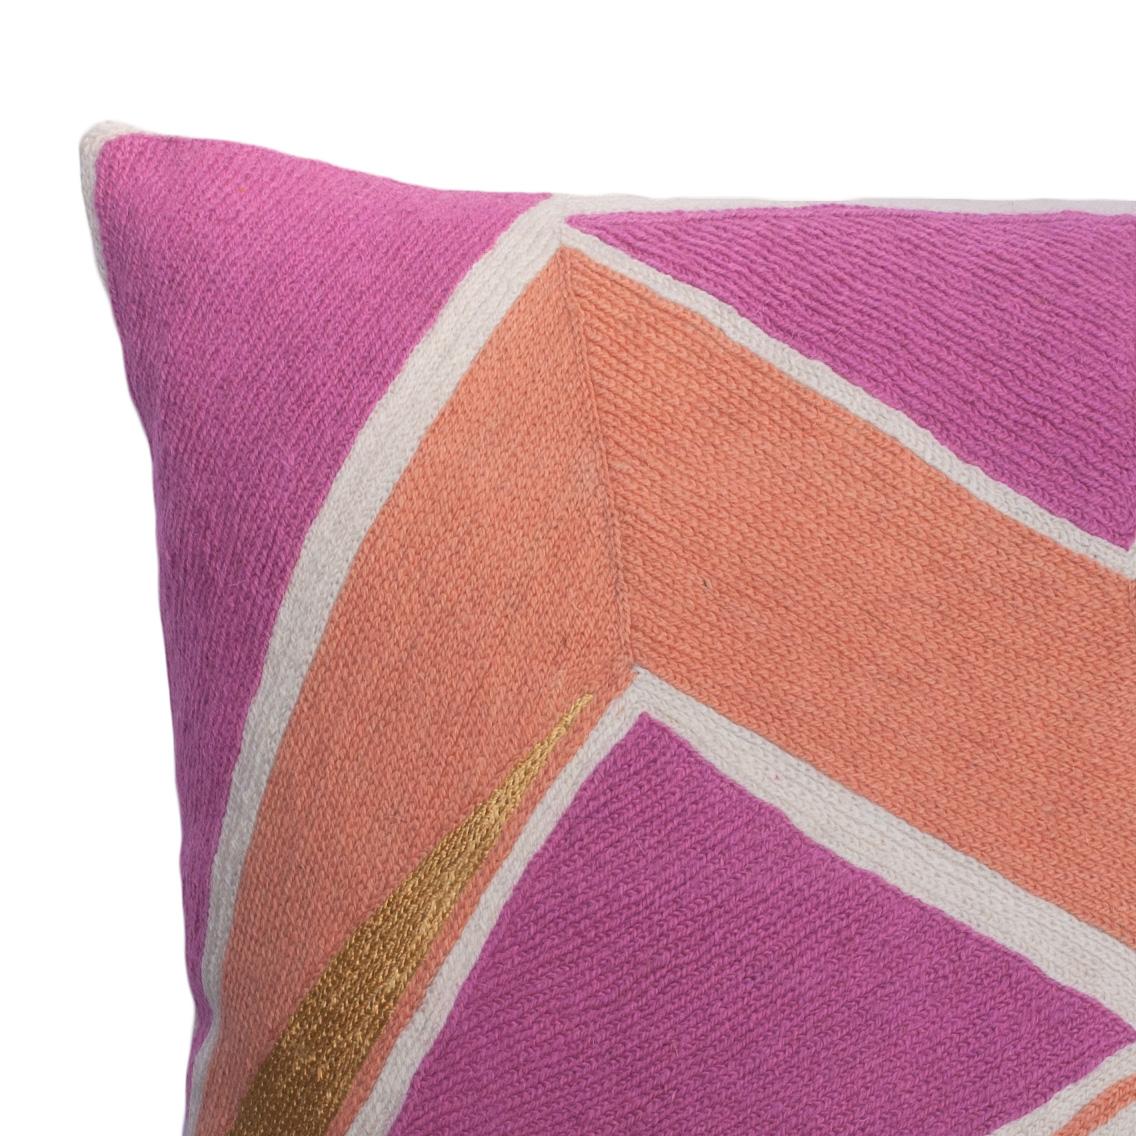 Indian Modern Geometric Detroit Blush Hand Embroidered Throw Pillow Cover